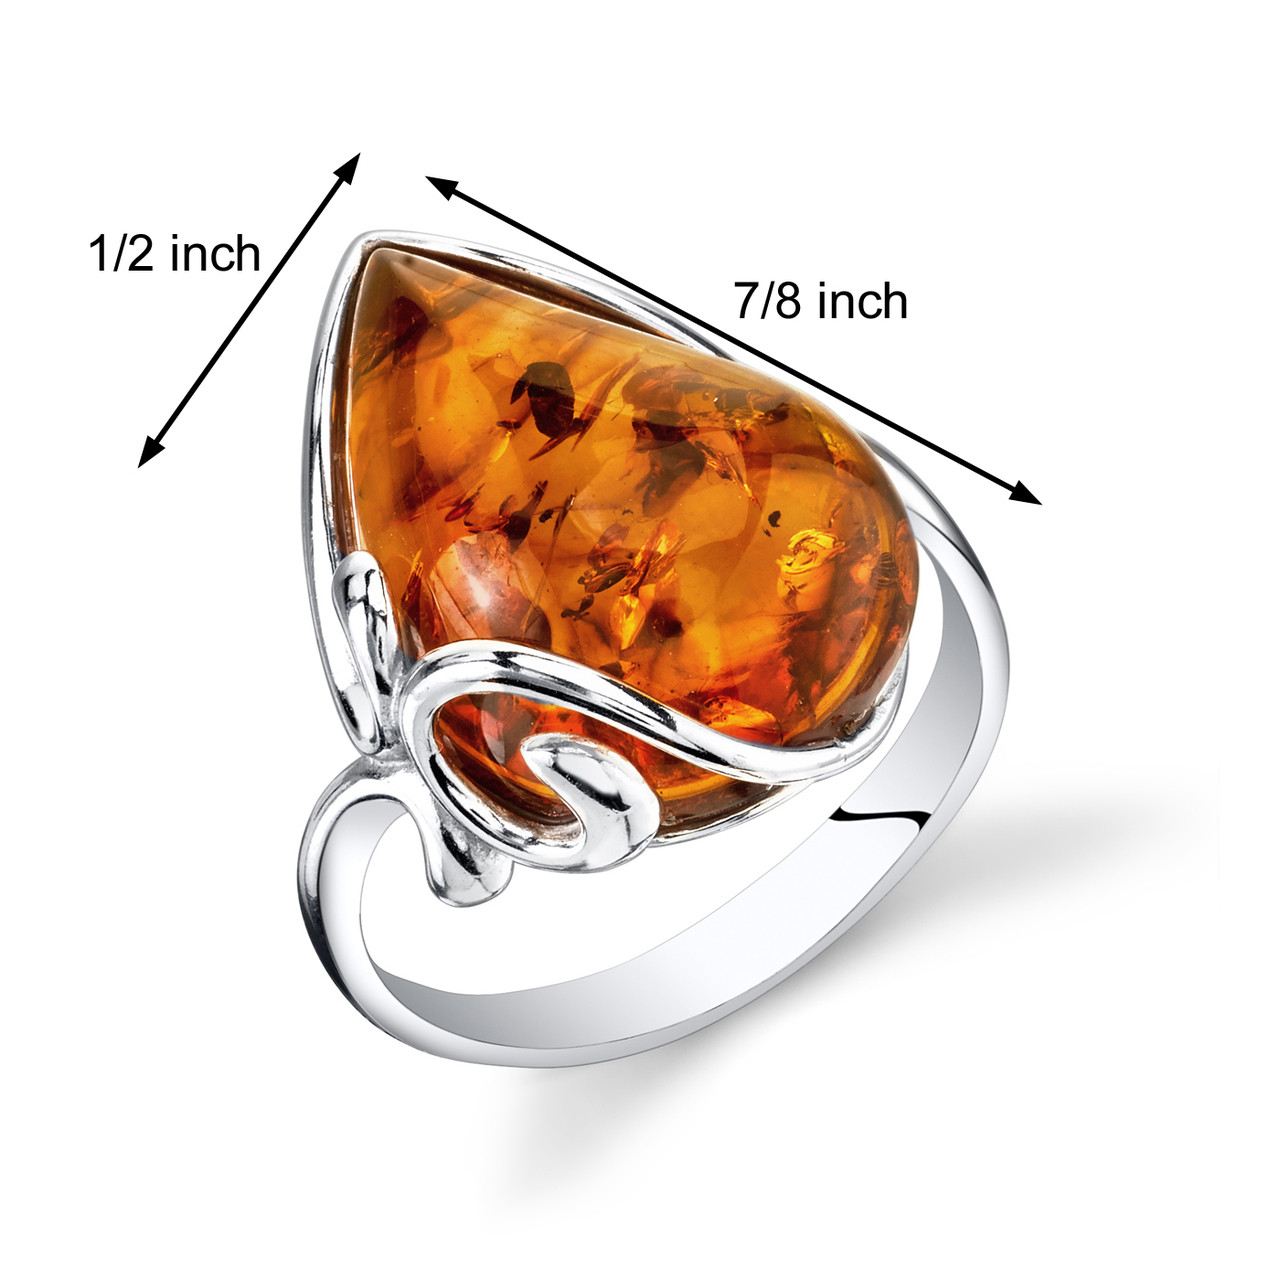 Amber Large Tear Drop Ring Sterling Silver Cognac Sizes 5-9 SR11324